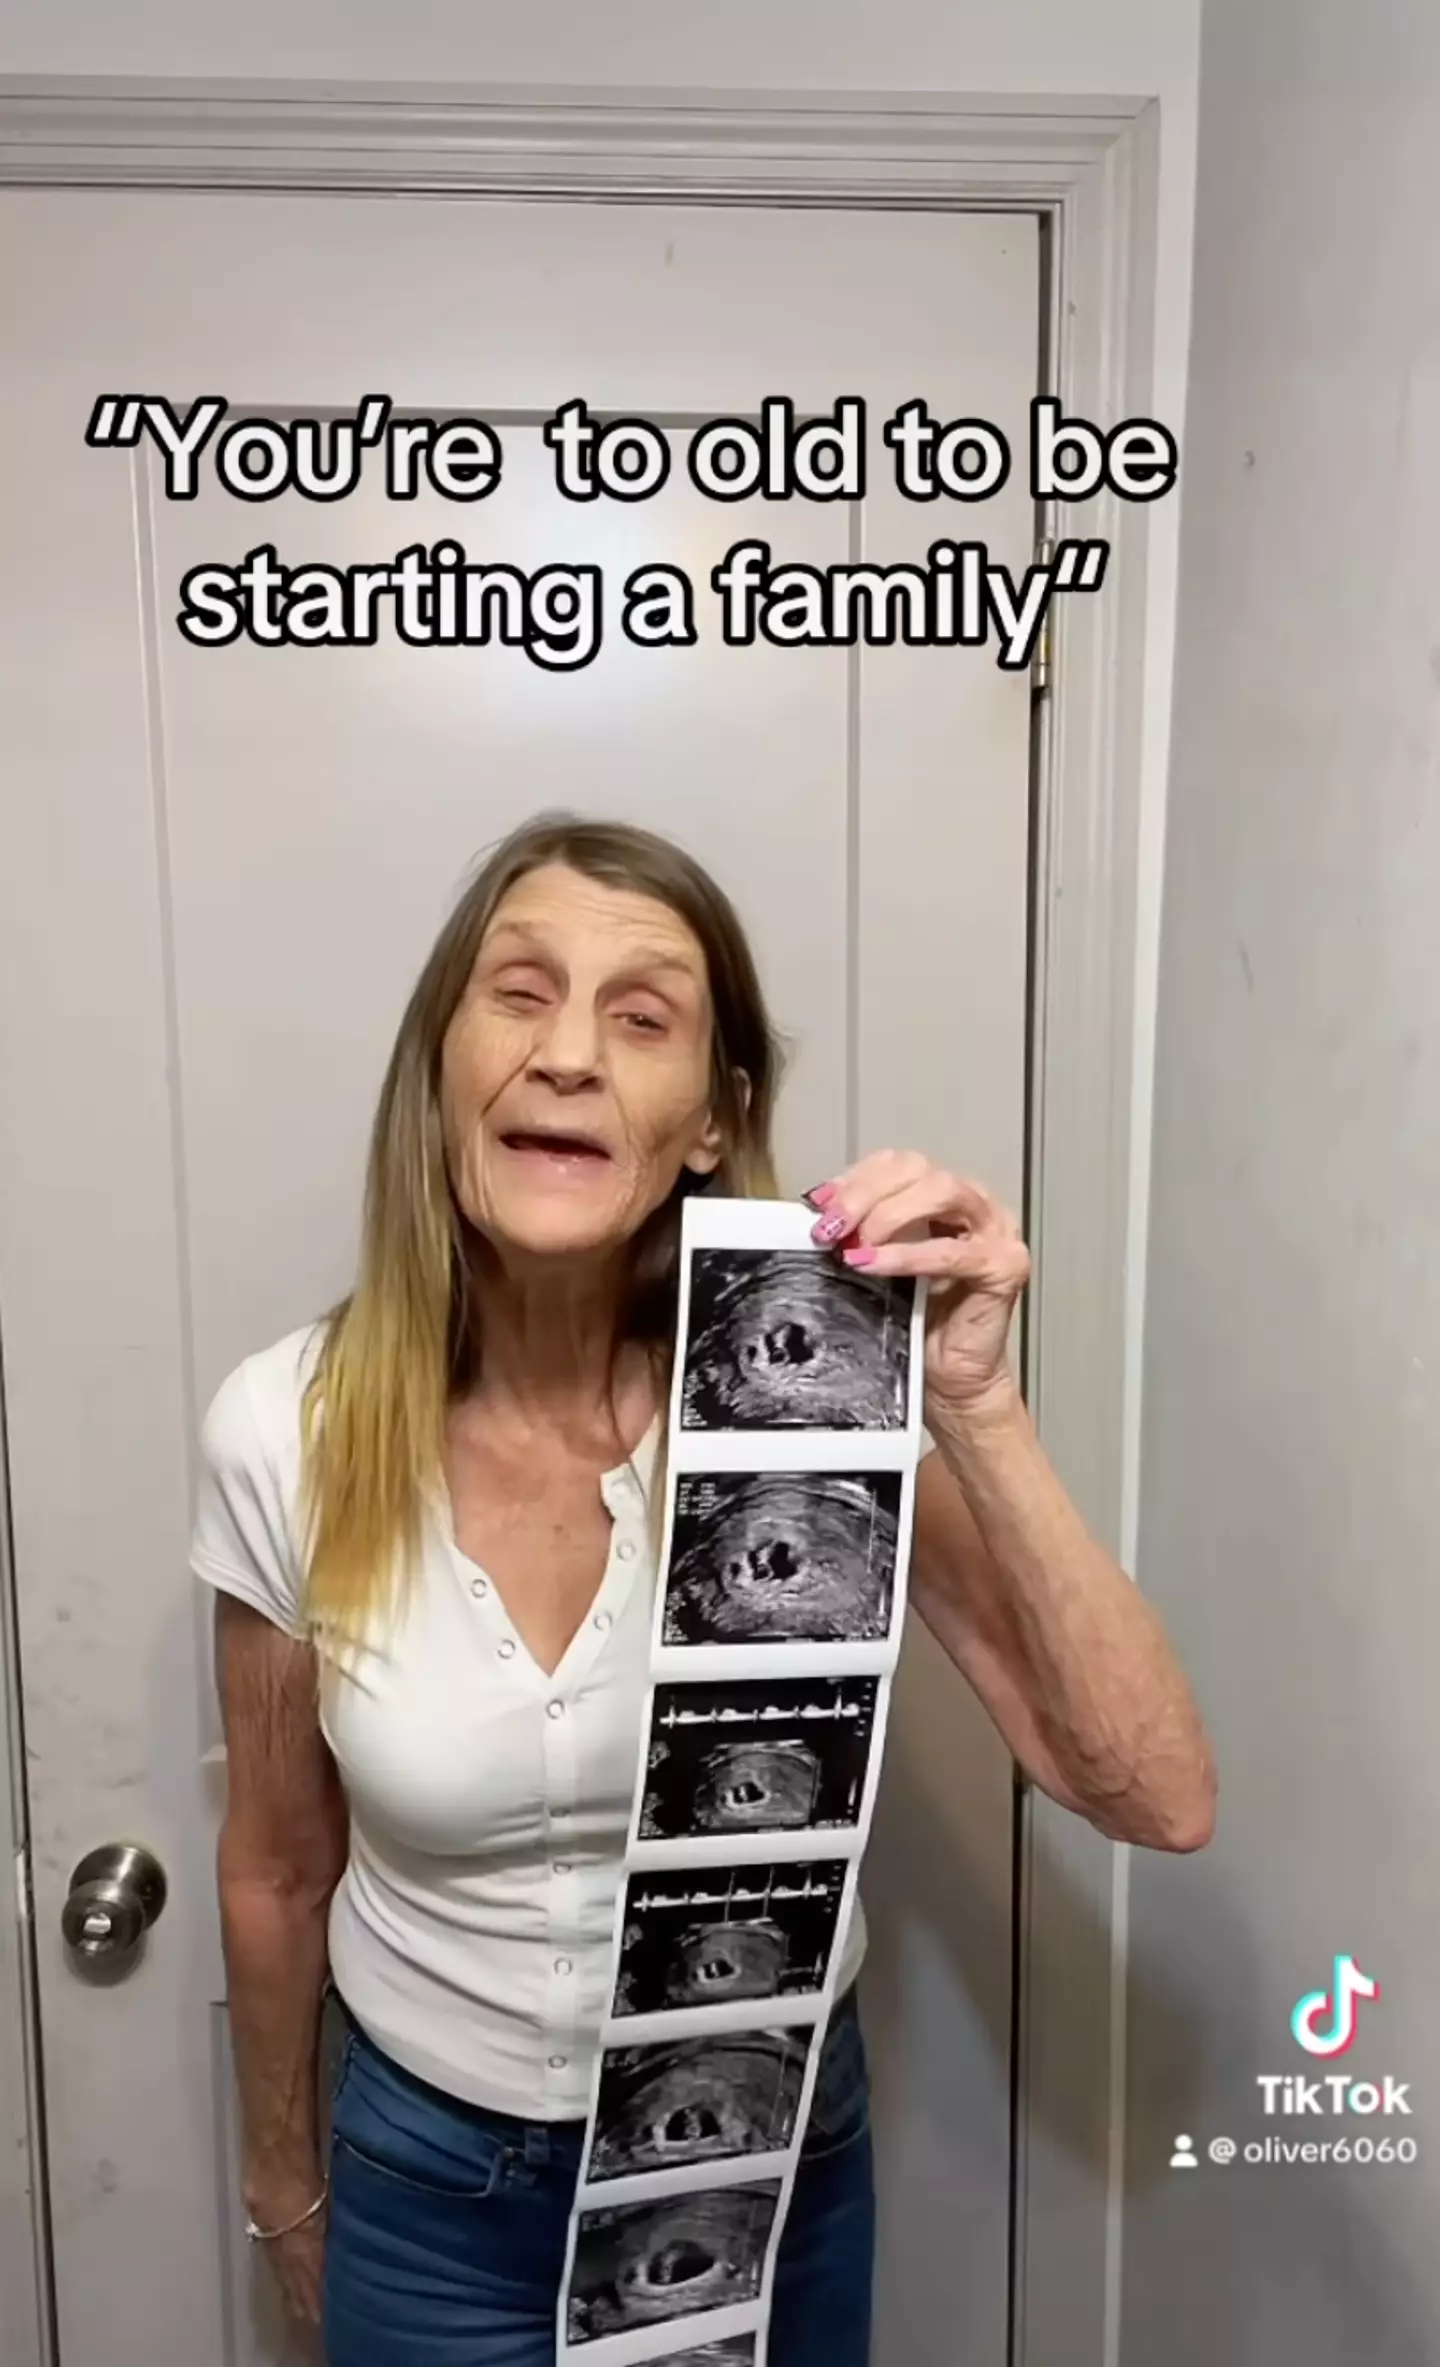 The pair are expecting a baby via surrogacy. (TikTok/@therealoliver6060)